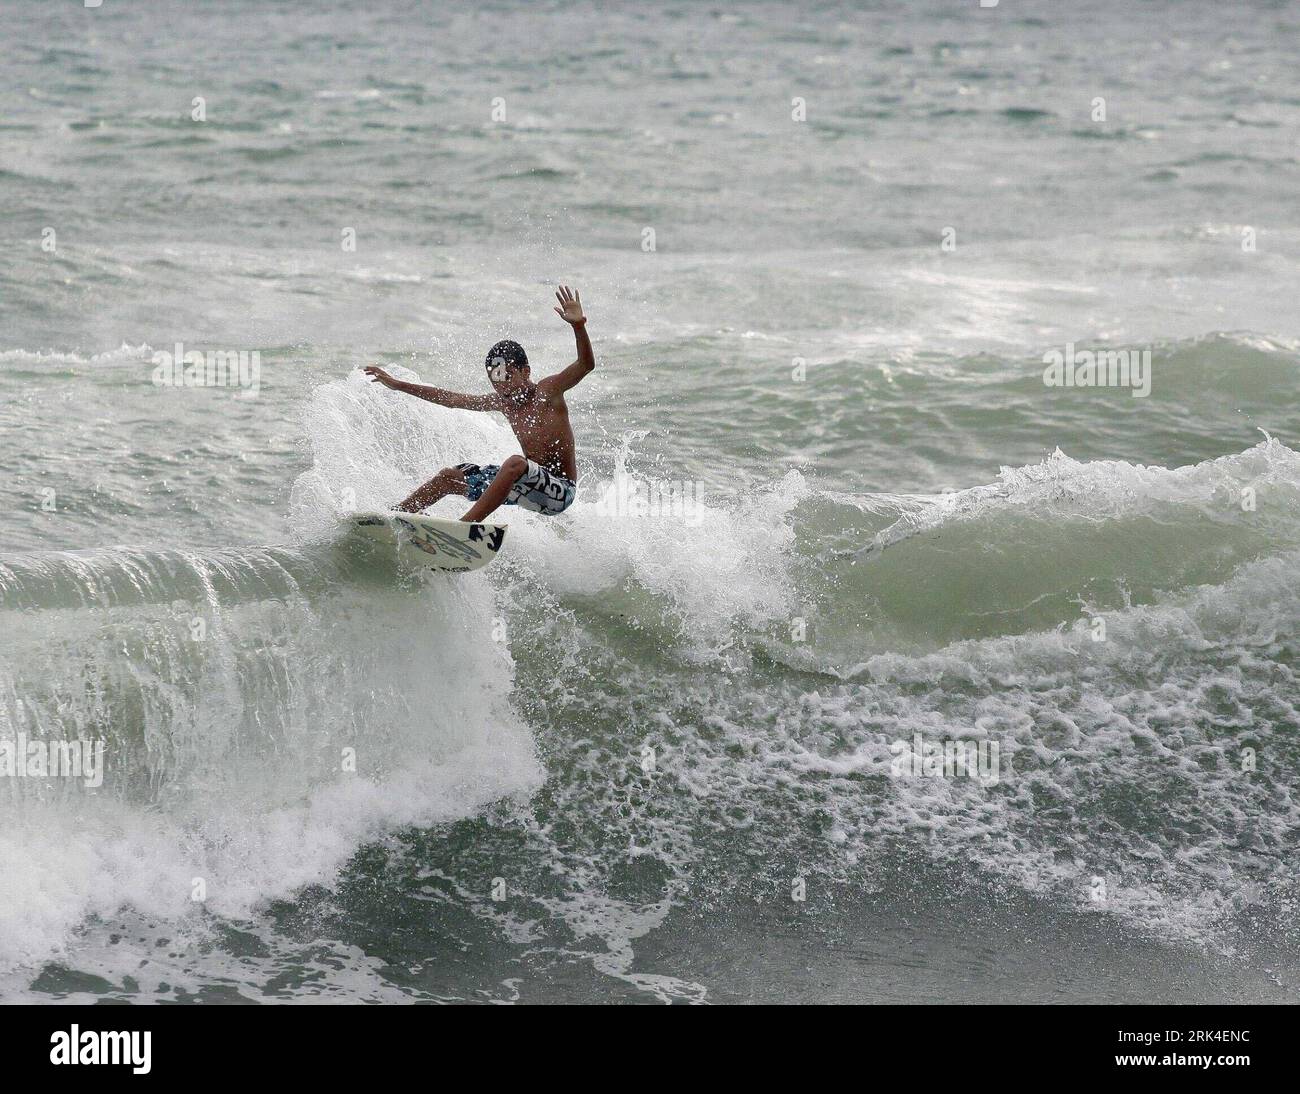 Bildnummer: 53620086  Datum: 05.11.2009  Copyright: imago/Xinhua (091120) -- SAN JOSE, Nov. 20, 2009 (Xinhua) -- Leonardo Calvo Arrieta goes surfing in Puntarenas, Costa Rica, on Nov. 5, 2009. Bordered by the Pacific Ocean to the west and the Caribbean Sea to the east, the Central American country of Costa Rica is a heaven for surfing fans from all over the world and also a cradle for many surfing master-hands. Leonardo Calvo Arrieta is one of them. Though he is only 12, Leonardo has won the national champion of his age. Leonardo s parents found his surfing talent at the age of 6 and then bega Stock Photo